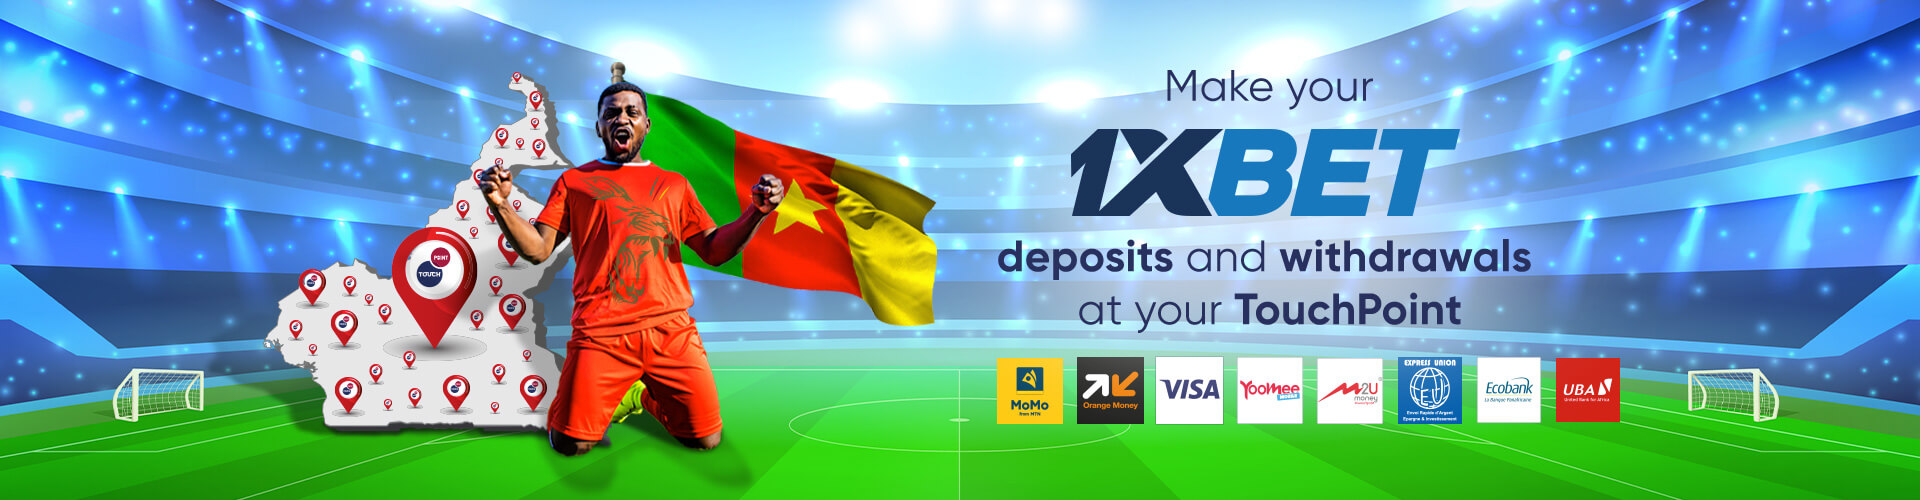 1XBET deposits and withdrawals with TouchPoint Banner